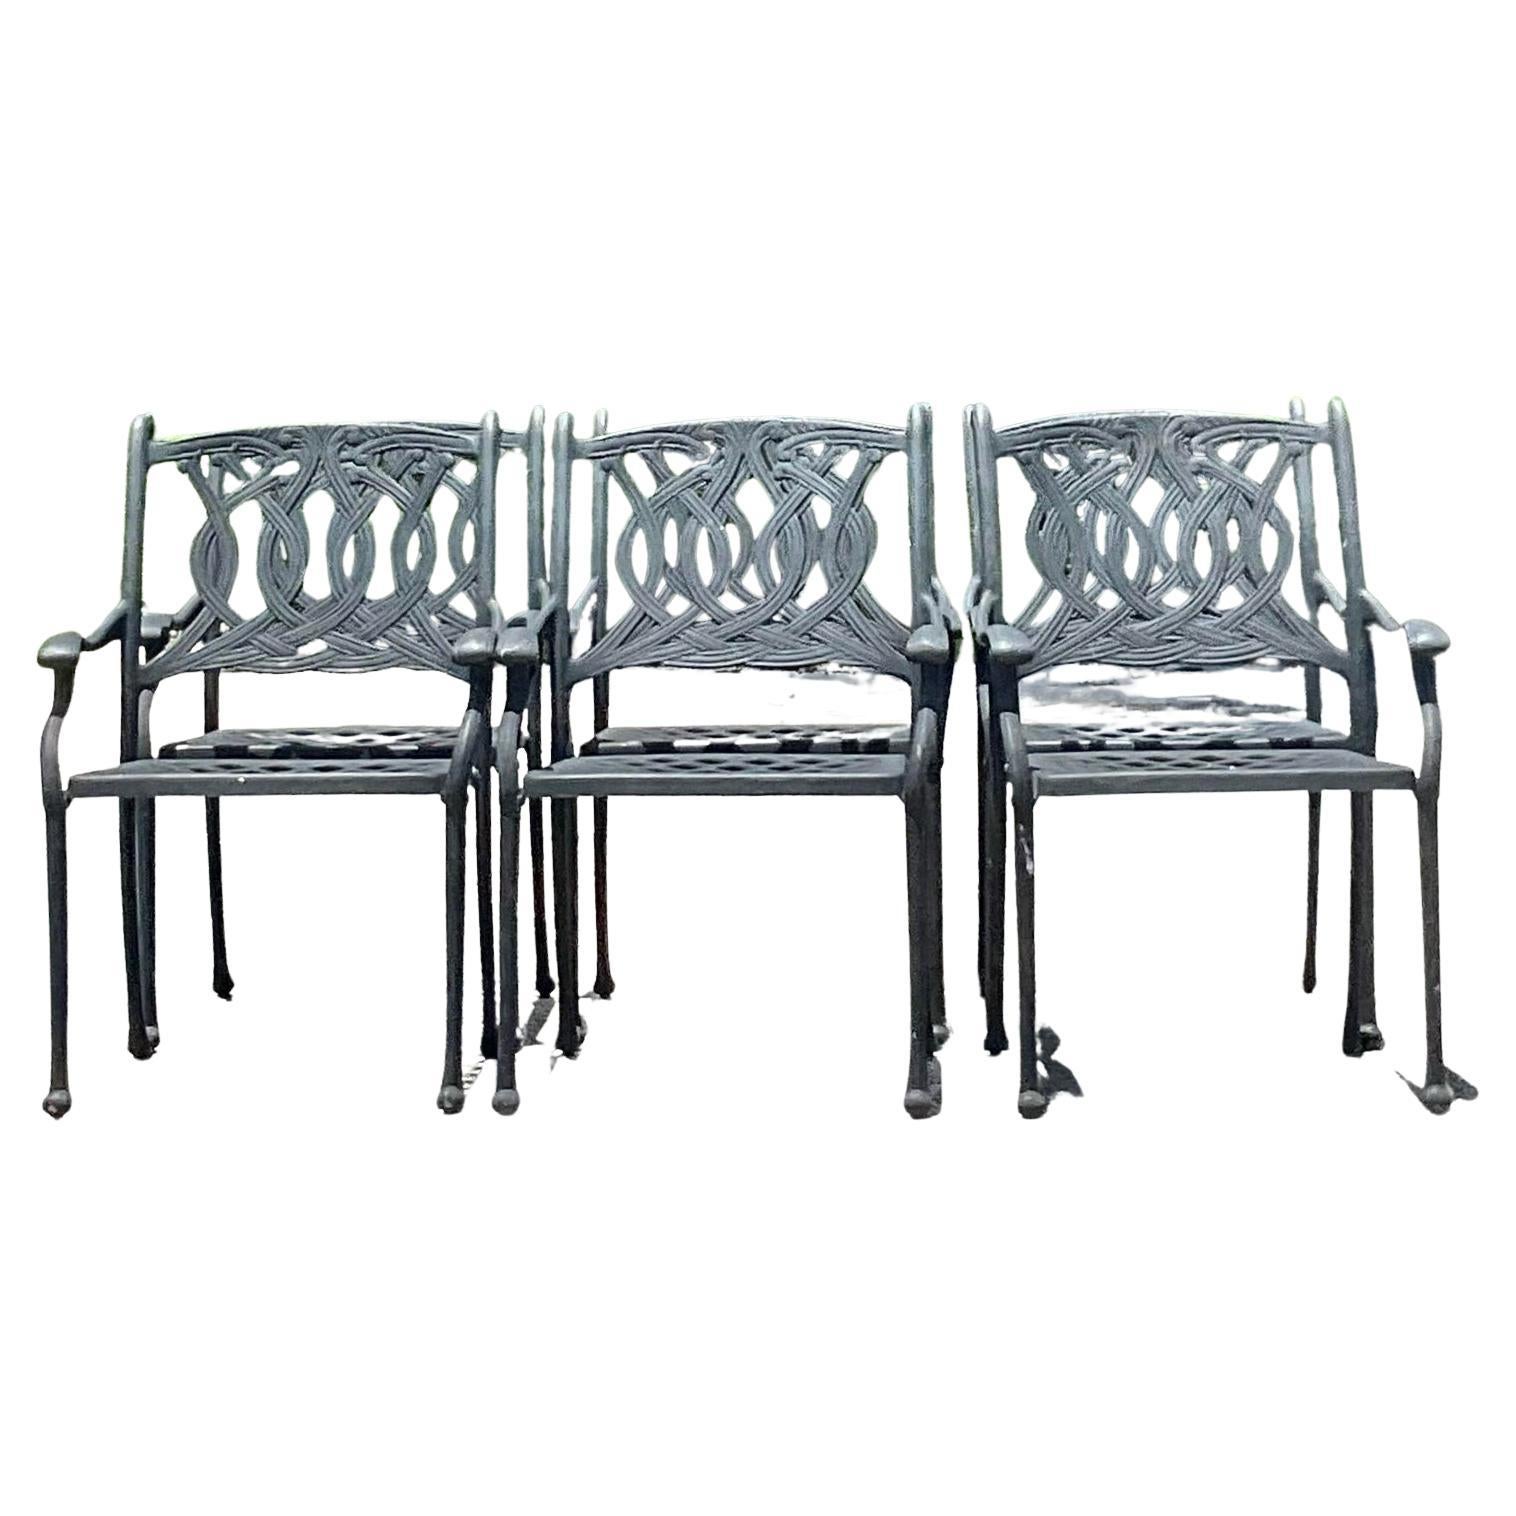 Vintage Coastal Scroll Cast Aluminum Dining Chairs - Set of 6 For Sale